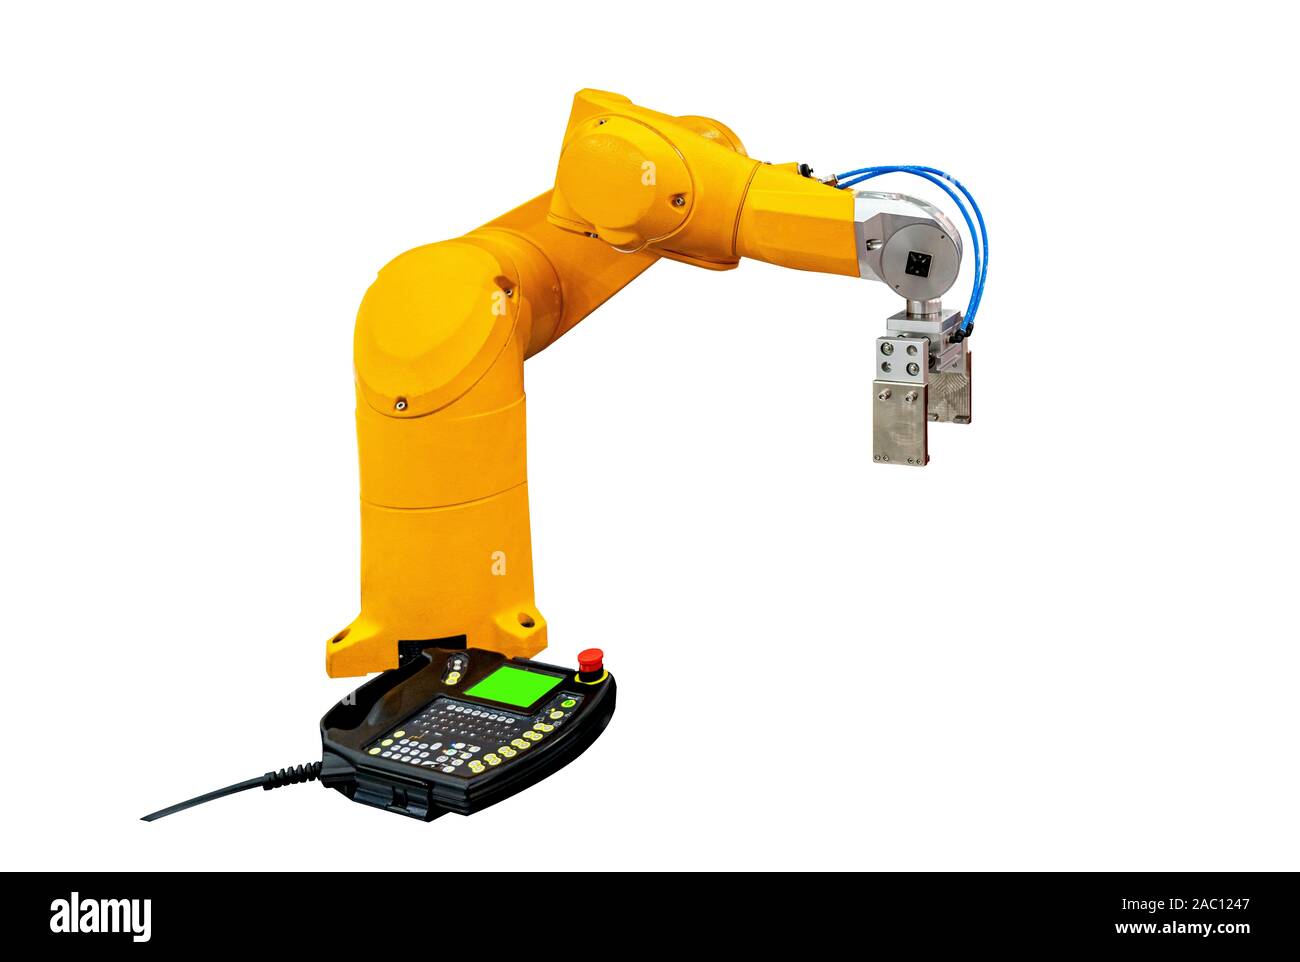 Isolated robot arm machine for industry manufacture operation on white background. Stock Photo